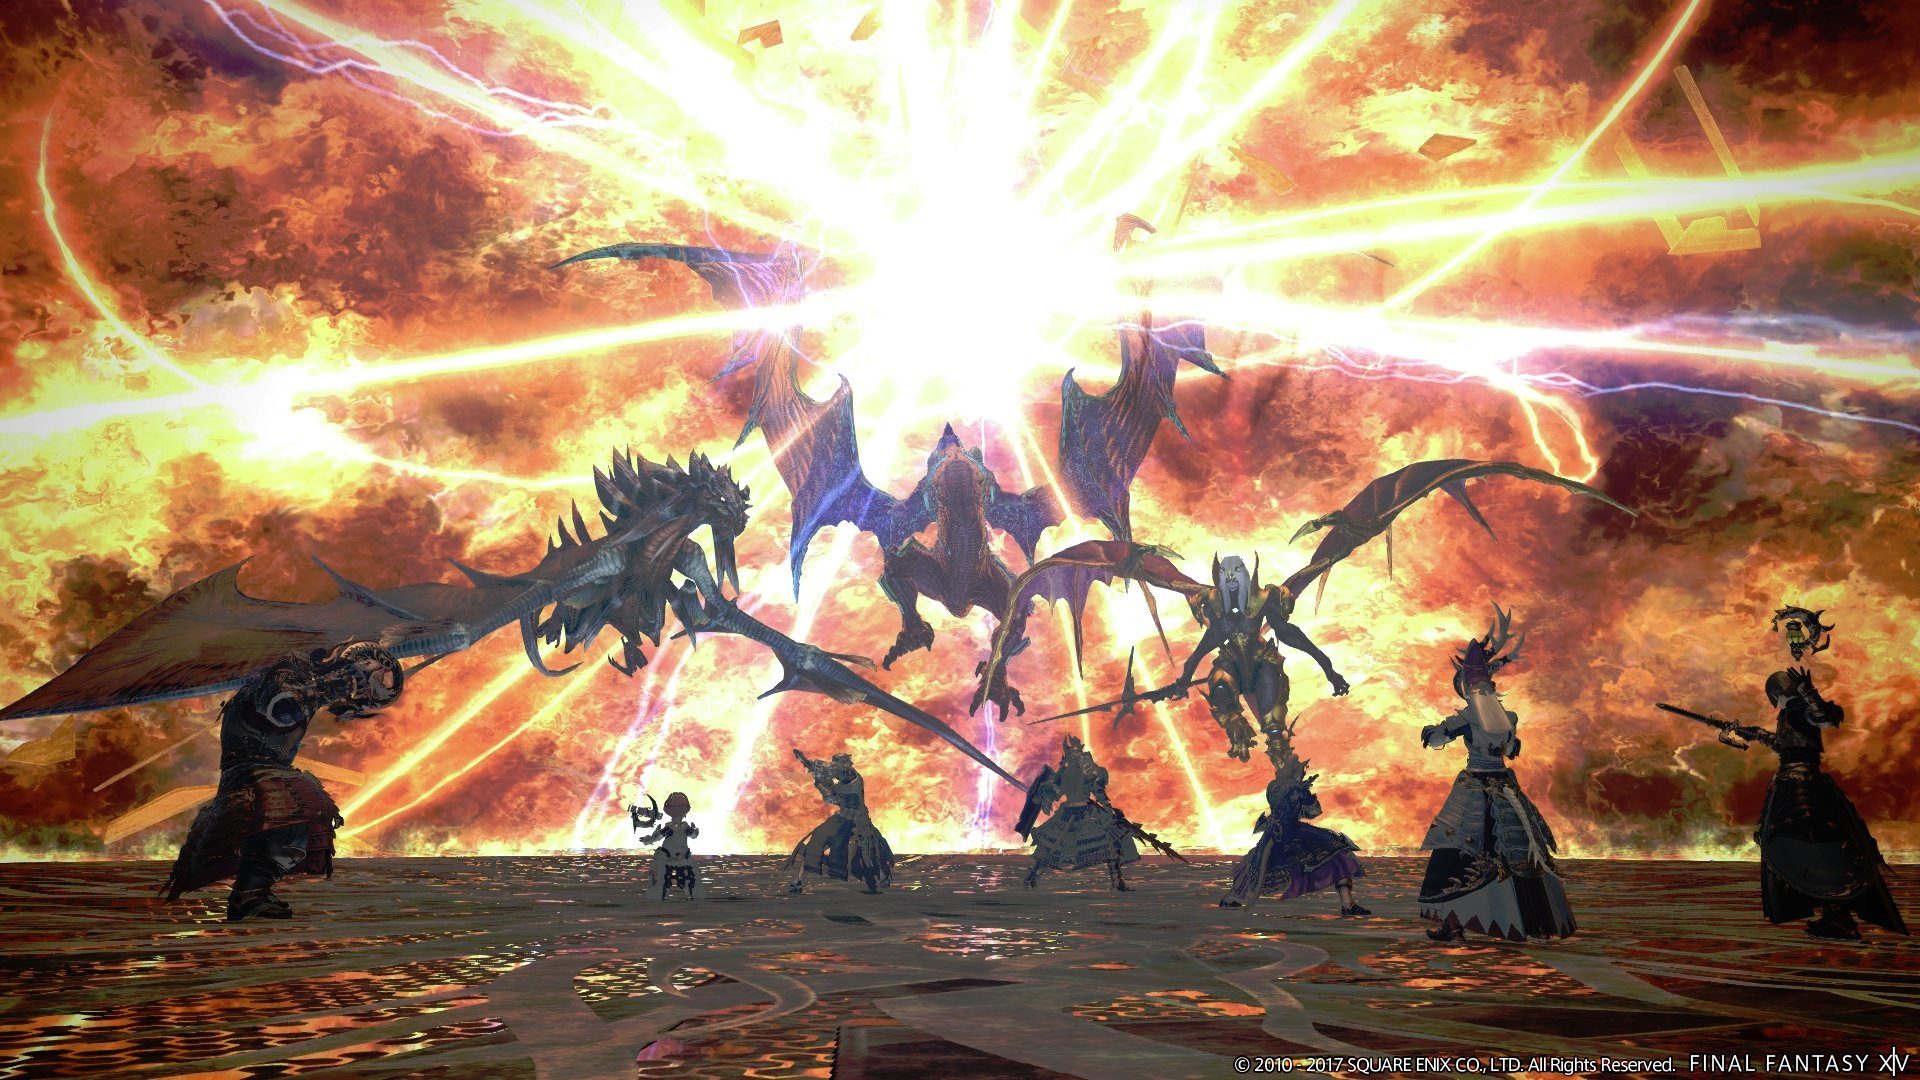 The Coils of Bahamut raids in Final Fantasy XIV